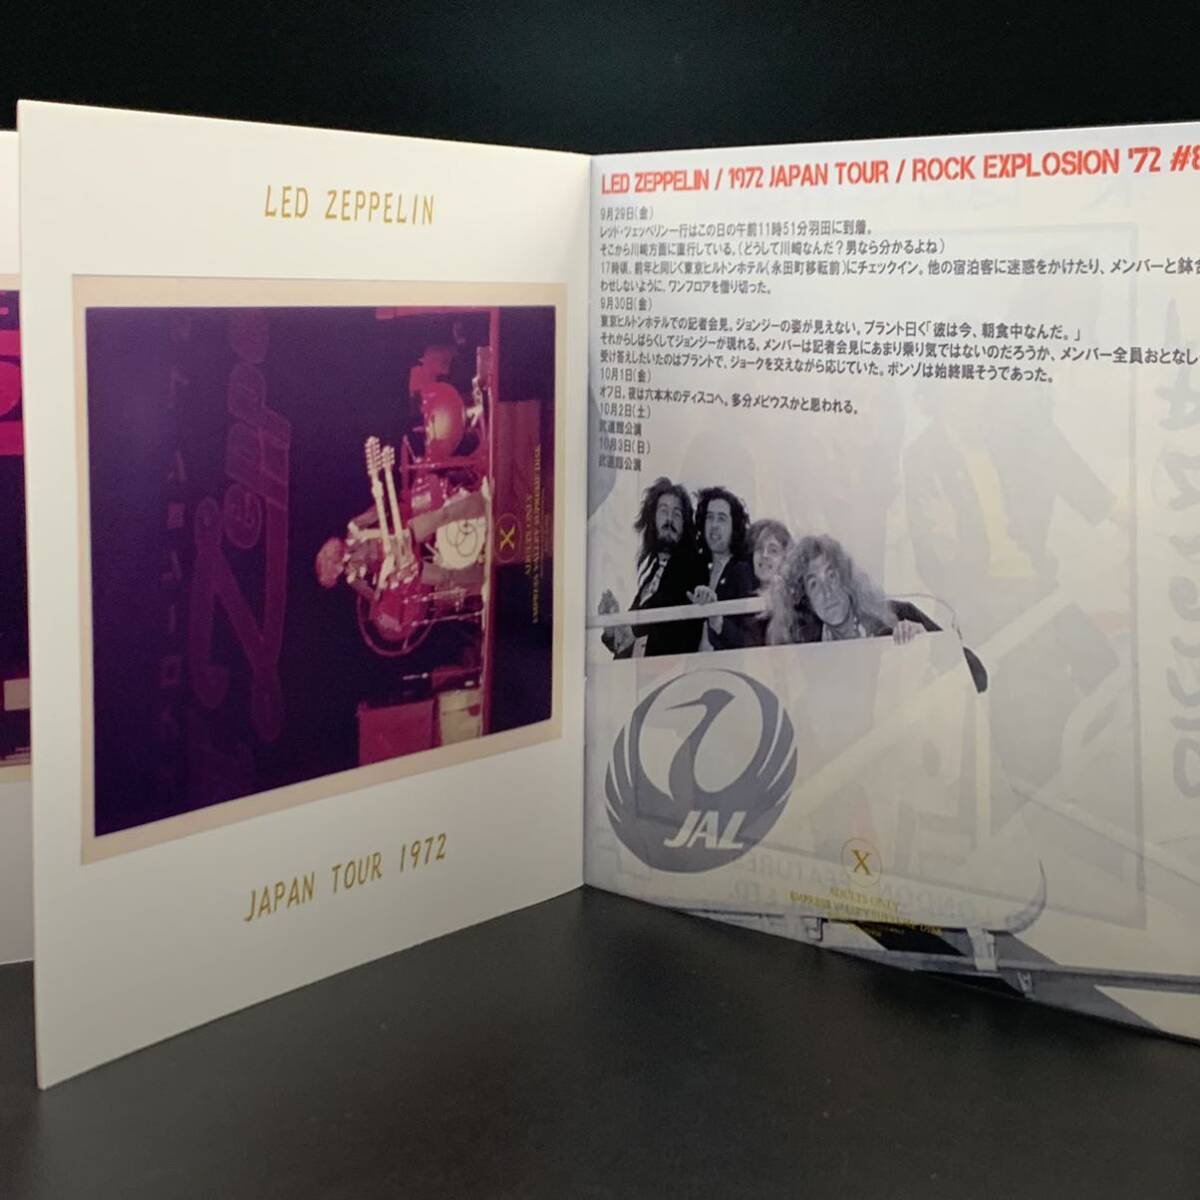 LED ZEPPELIN / JET STREAM - Pro Use Only 4CD Box with Booklet Set : Super Rare!! Hard to Find!! For enthusiastic collector only!!_画像7